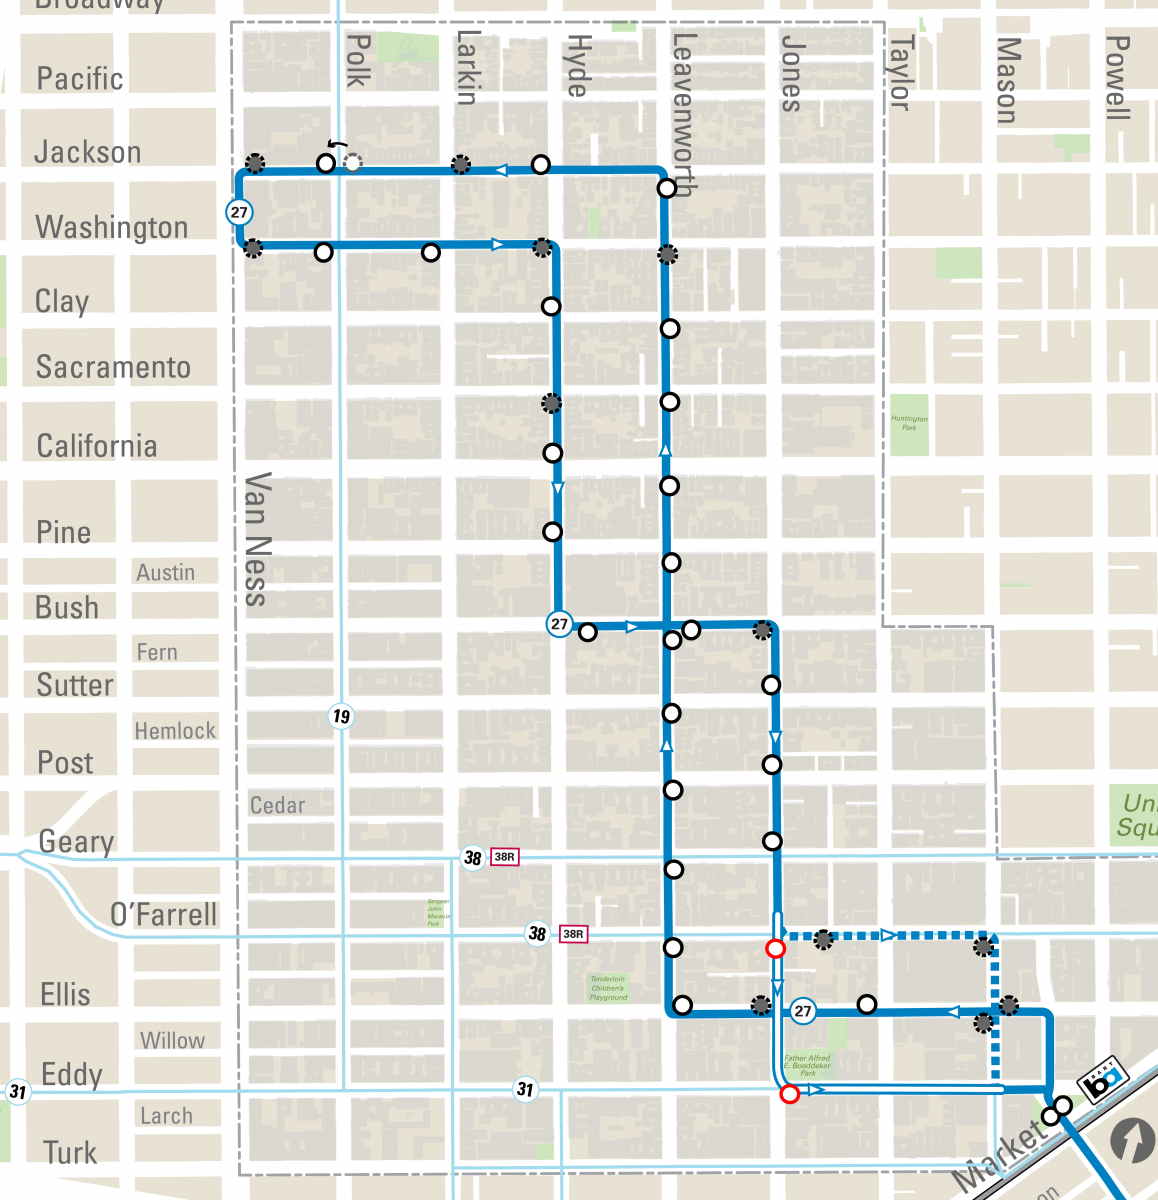 A map of the 27 Bryant route north of Market Street. It shows proposed bus stop removals, relocations, and proposed new stops and route. The proposal maintains 75% of stops (with 10 bus stop removals).